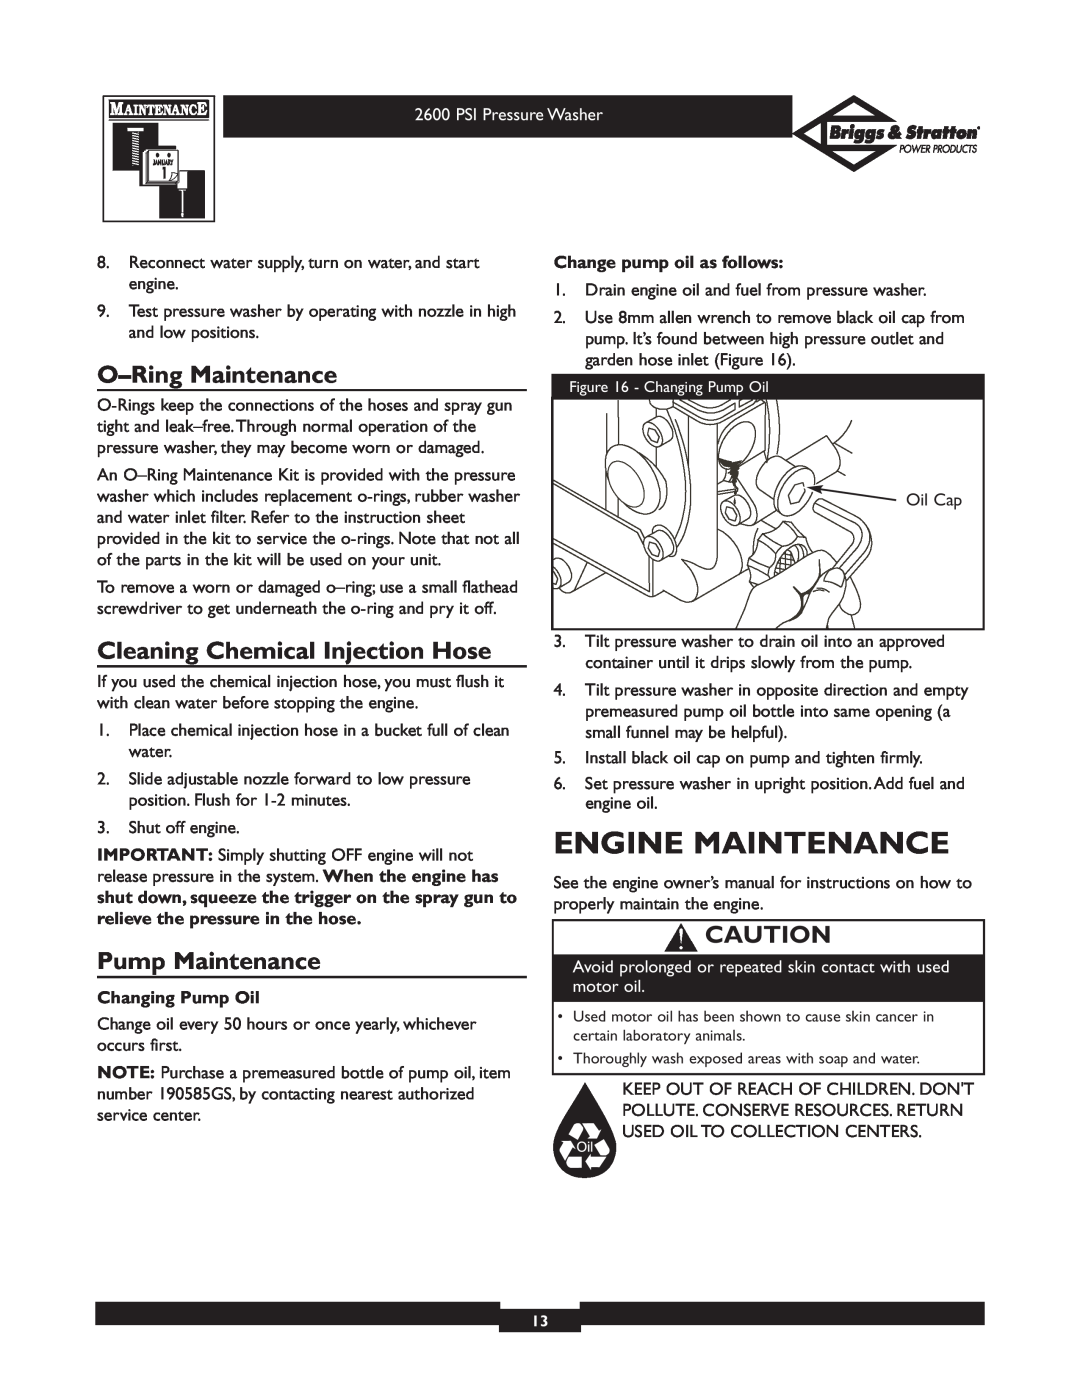 Briggs & Stratton 20216 Engine Maintenance, O-Ring Maintenance, Cleaning Chemical Injection Hose, Pump Maintenance 